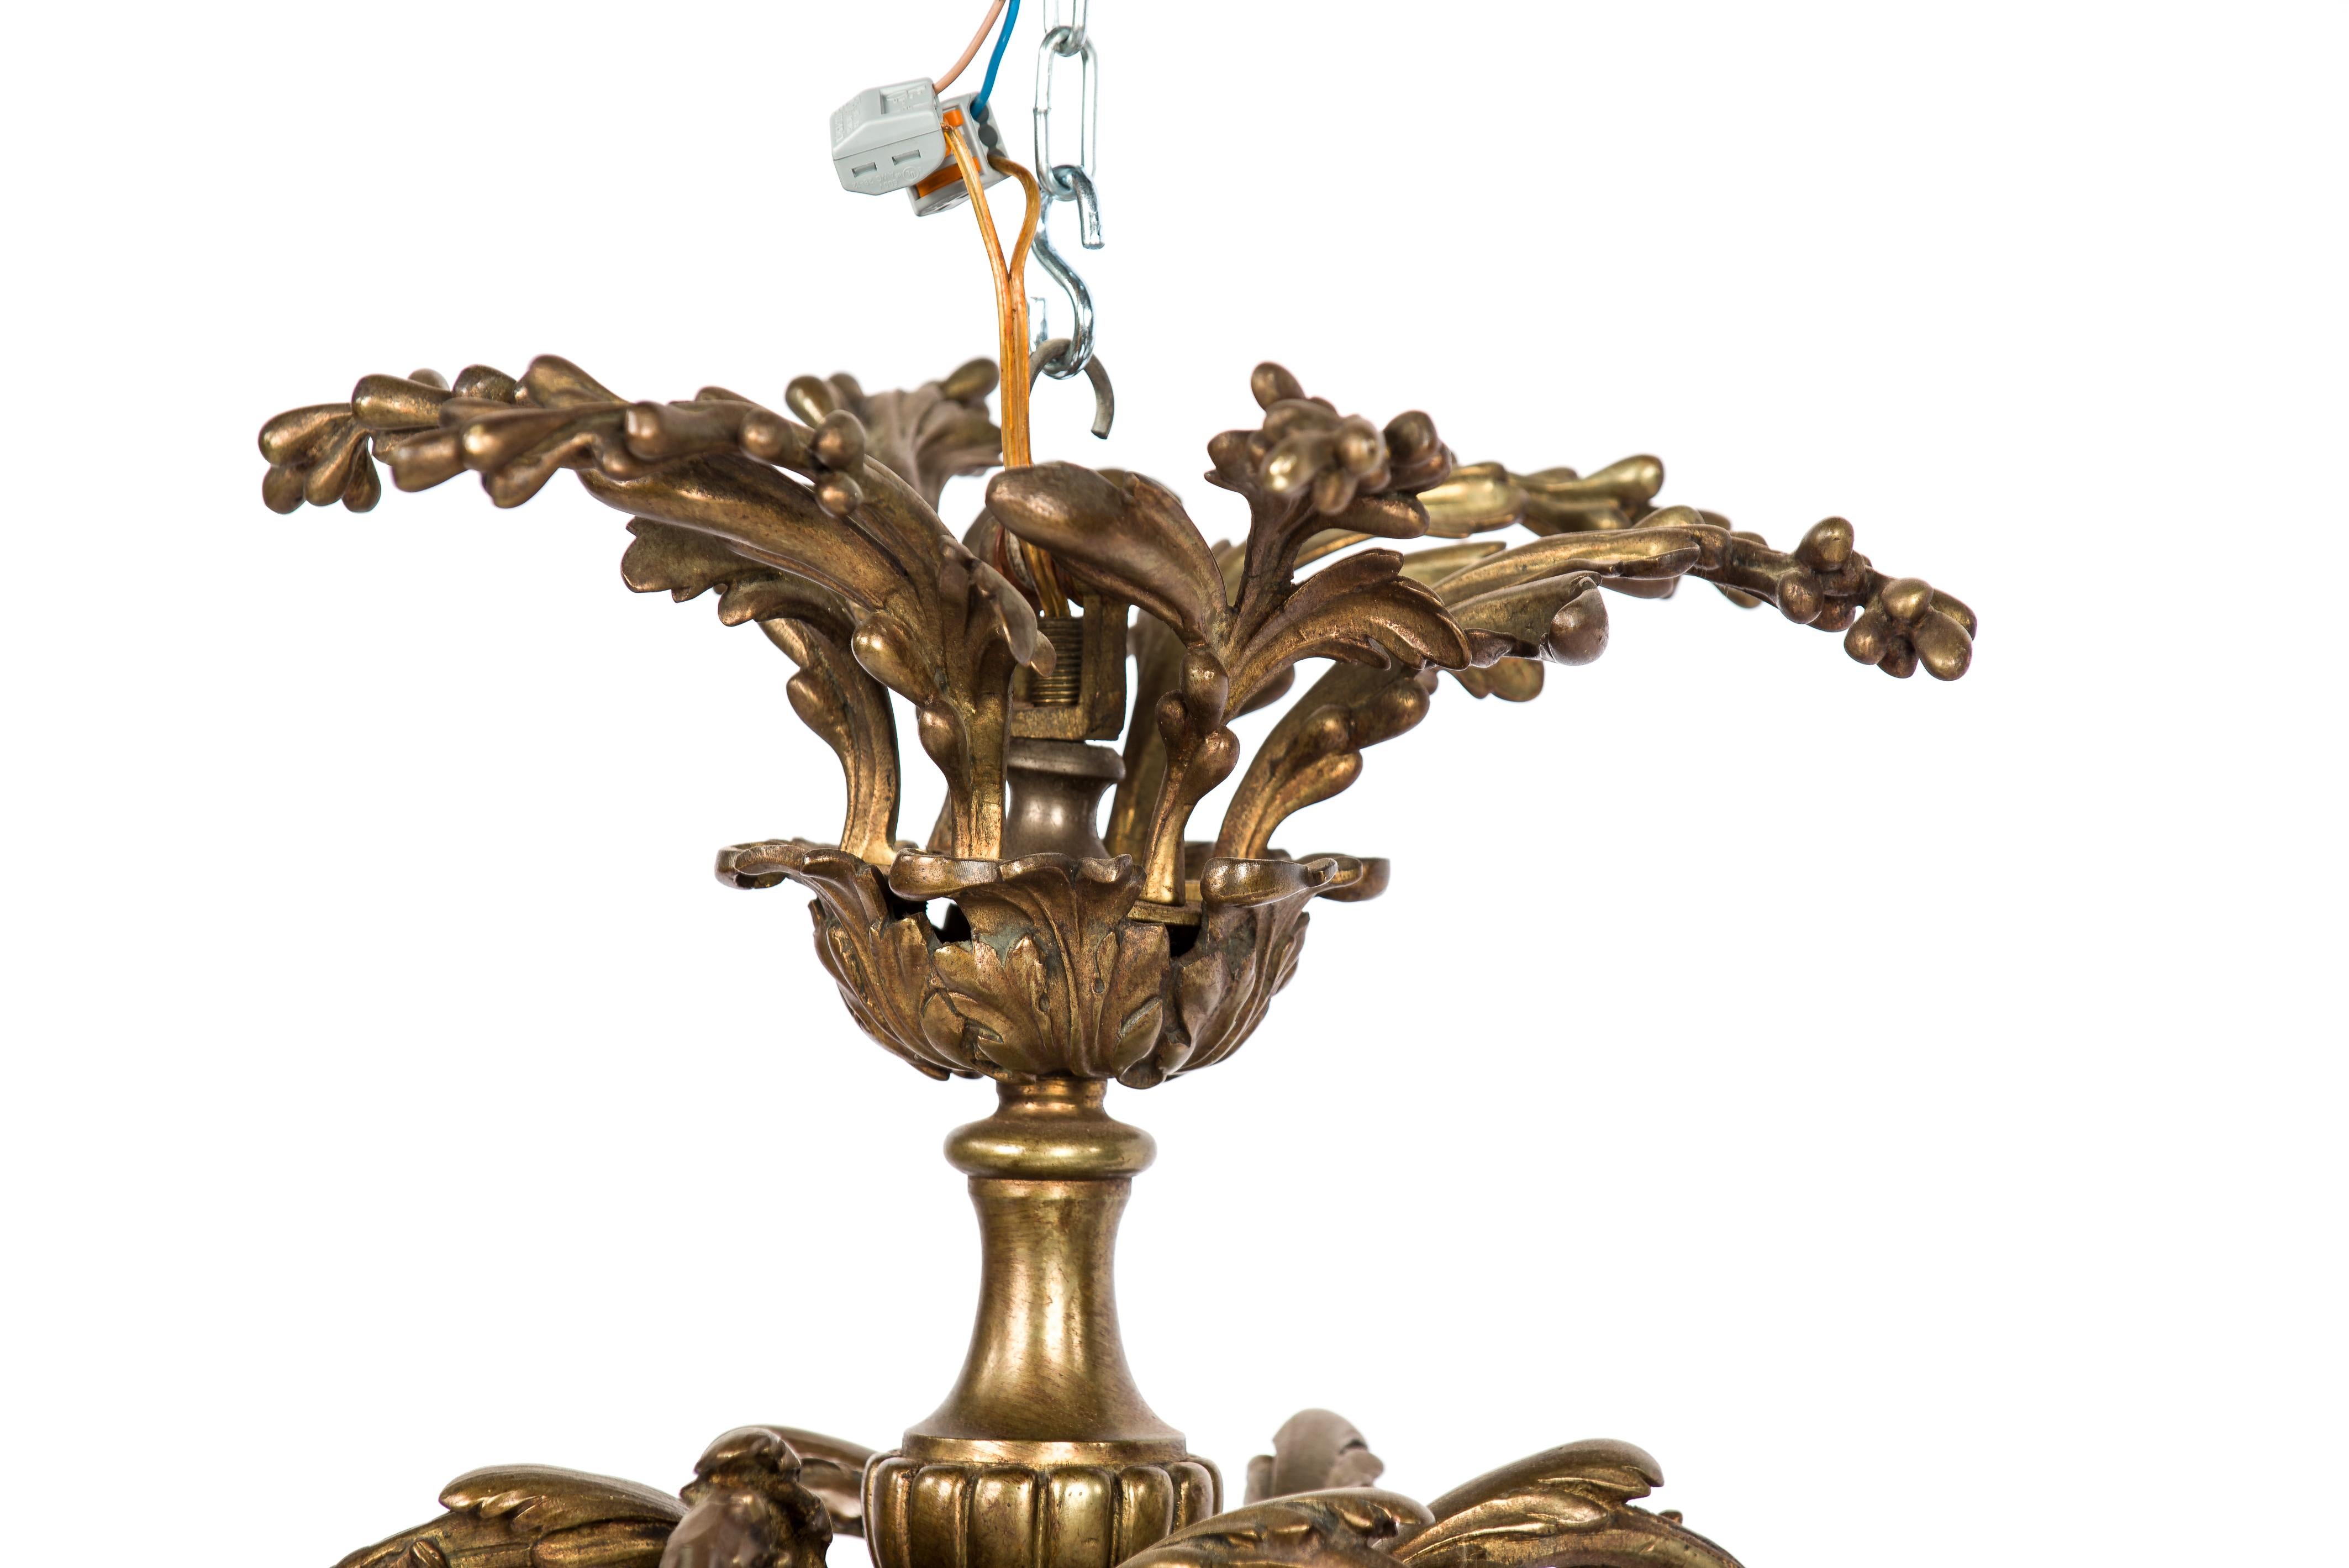 This beautiful compact chandelier was made in France in the late 19th century. The pendant features 6 asymmetrical shaped arms decorated with scrolls and acanthus. The central turned column of the lamp is decorated with a gadrooned mold, acanthus,